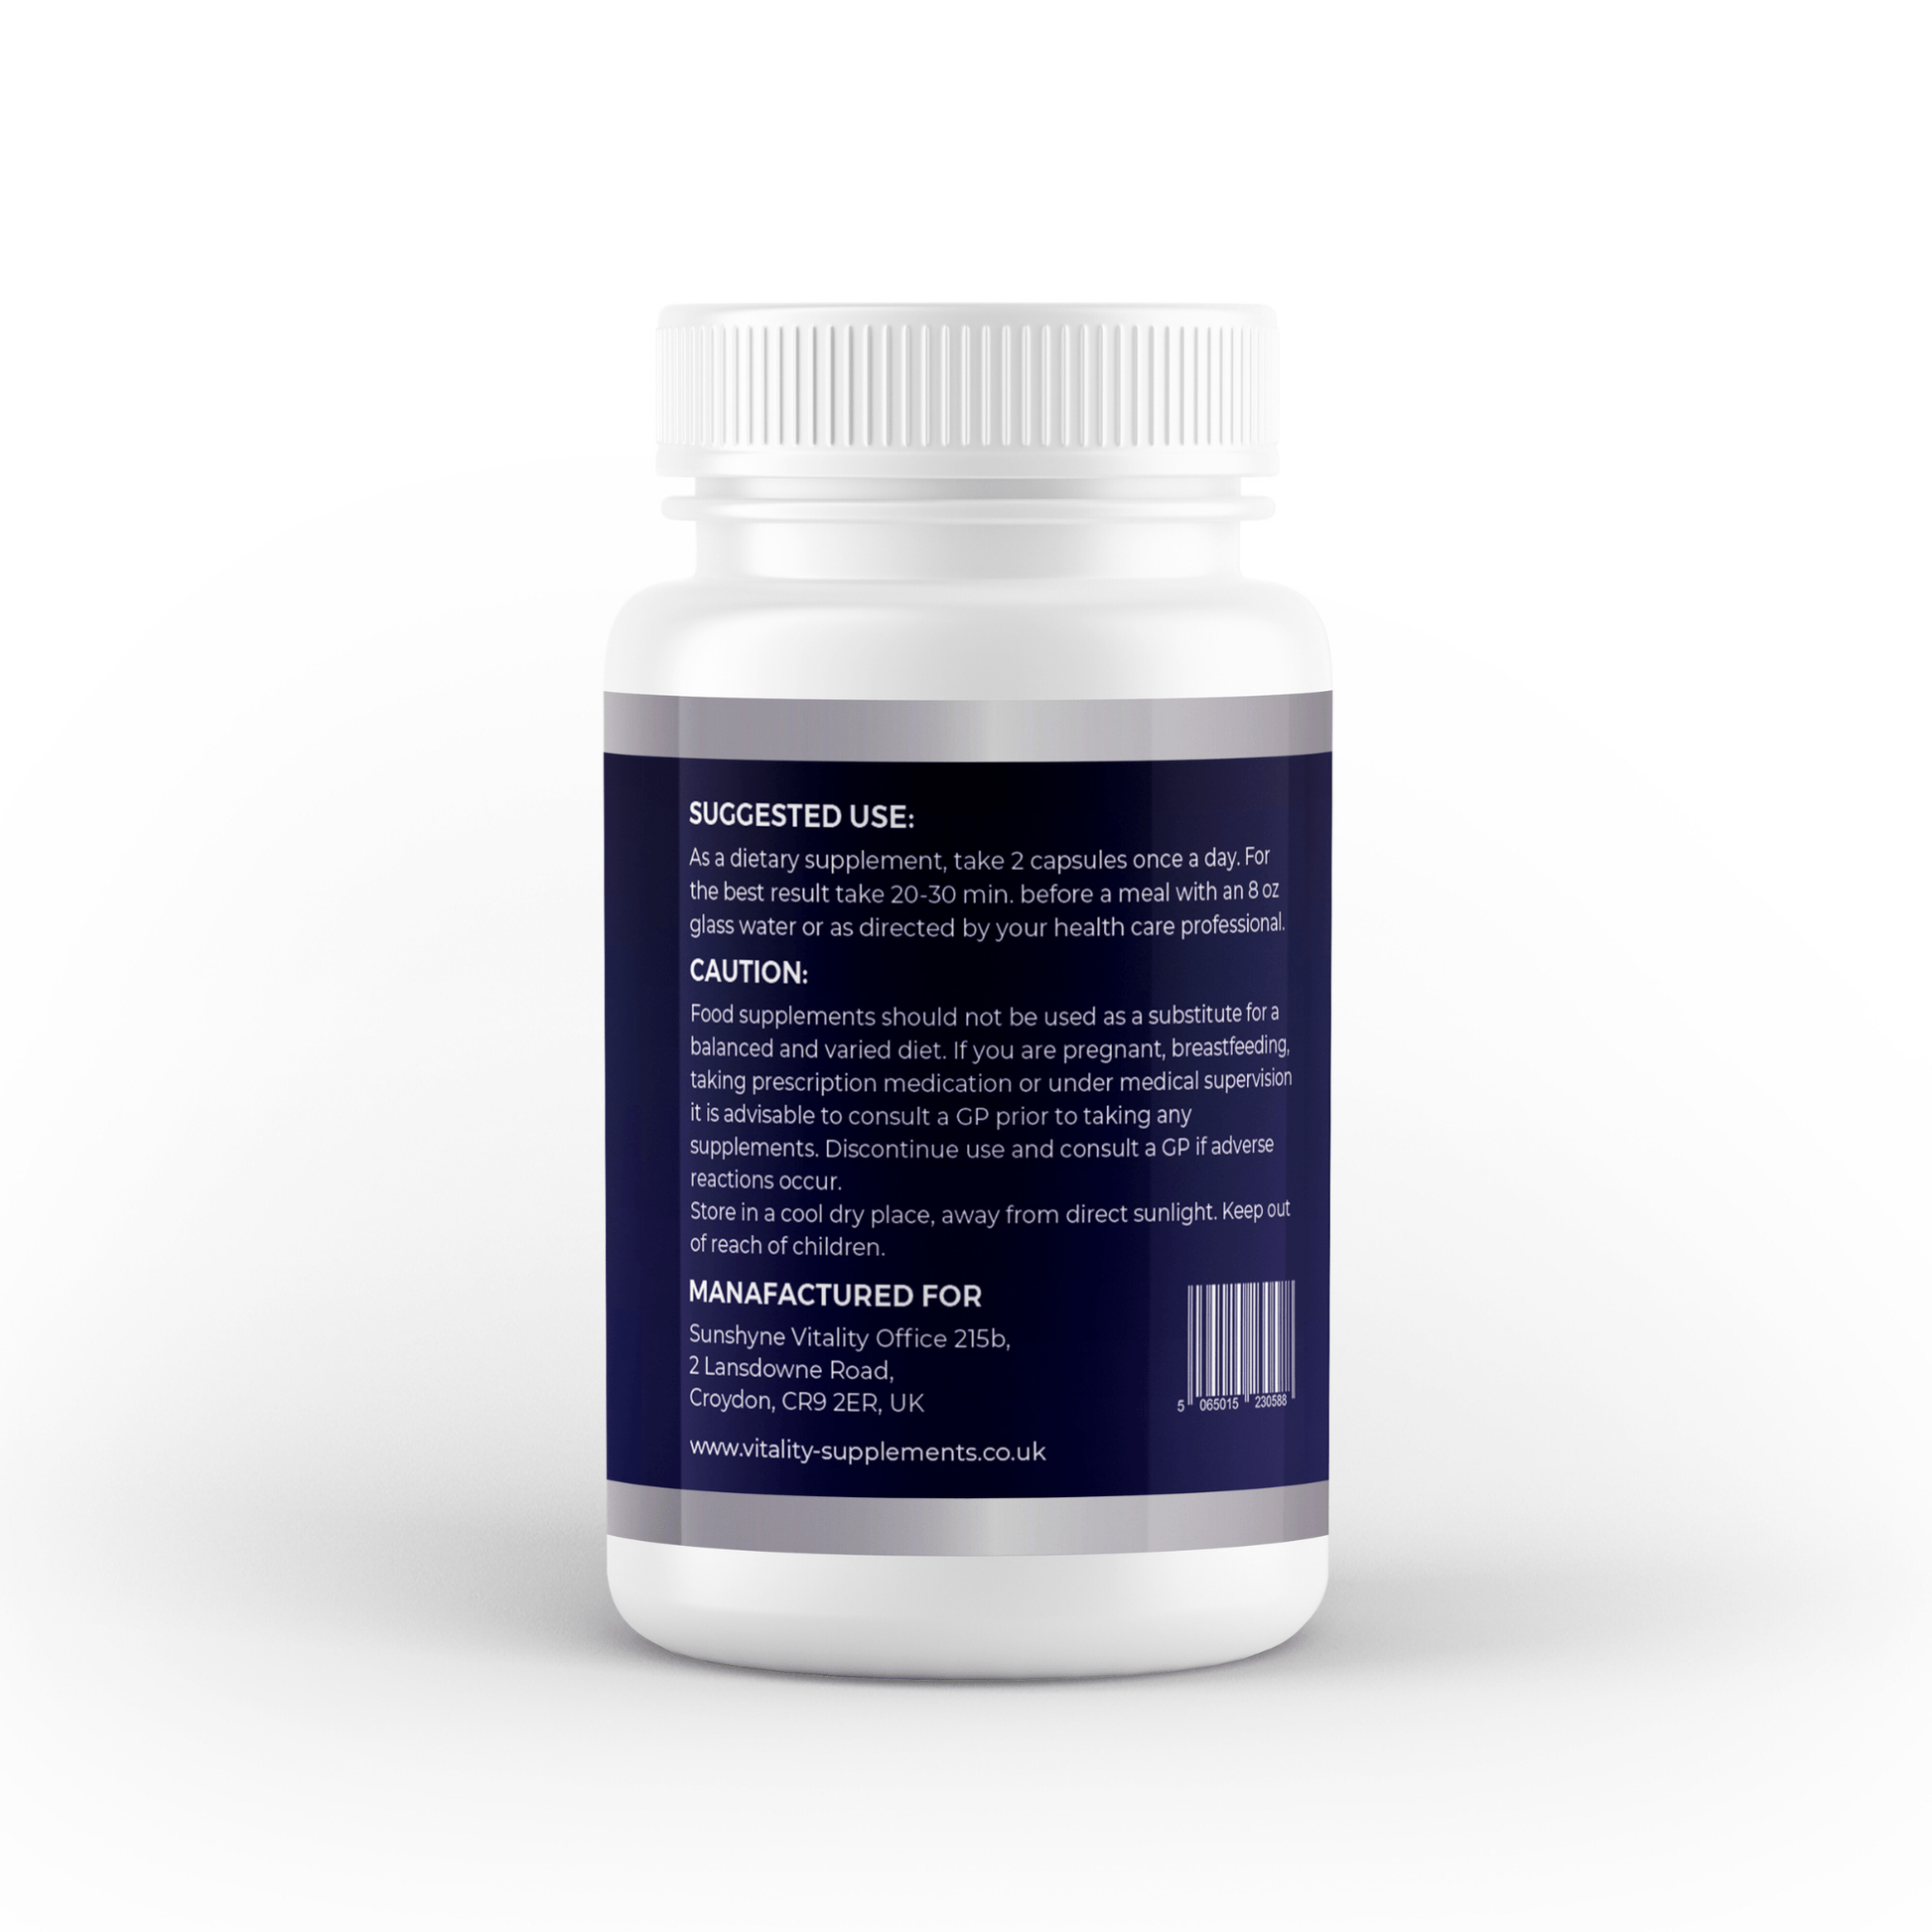 NMN Capsules 250mg - 1 Months Supply - Vitality Supplements